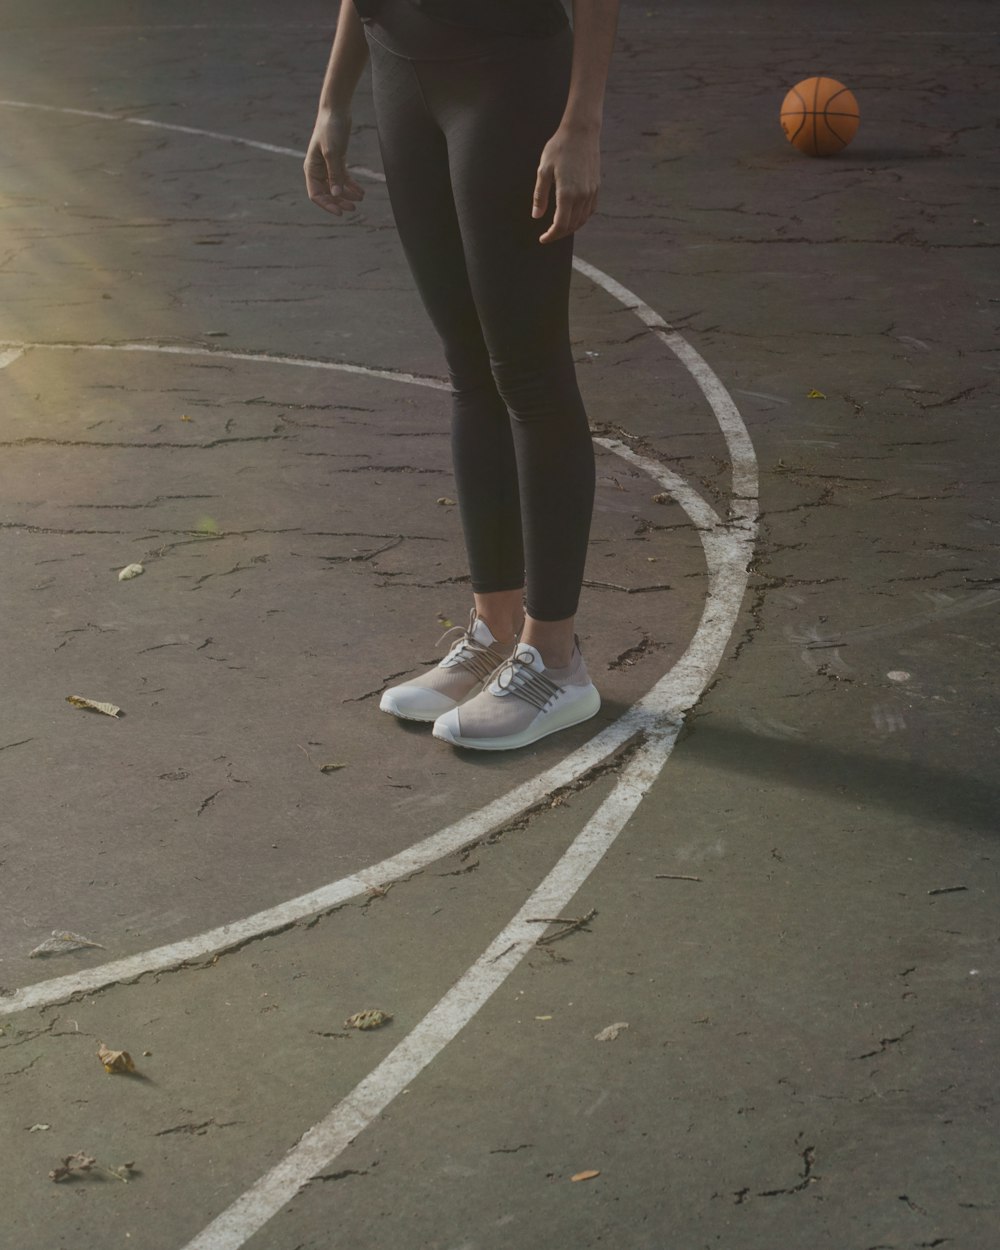 a person standing on a basketball court with a ball